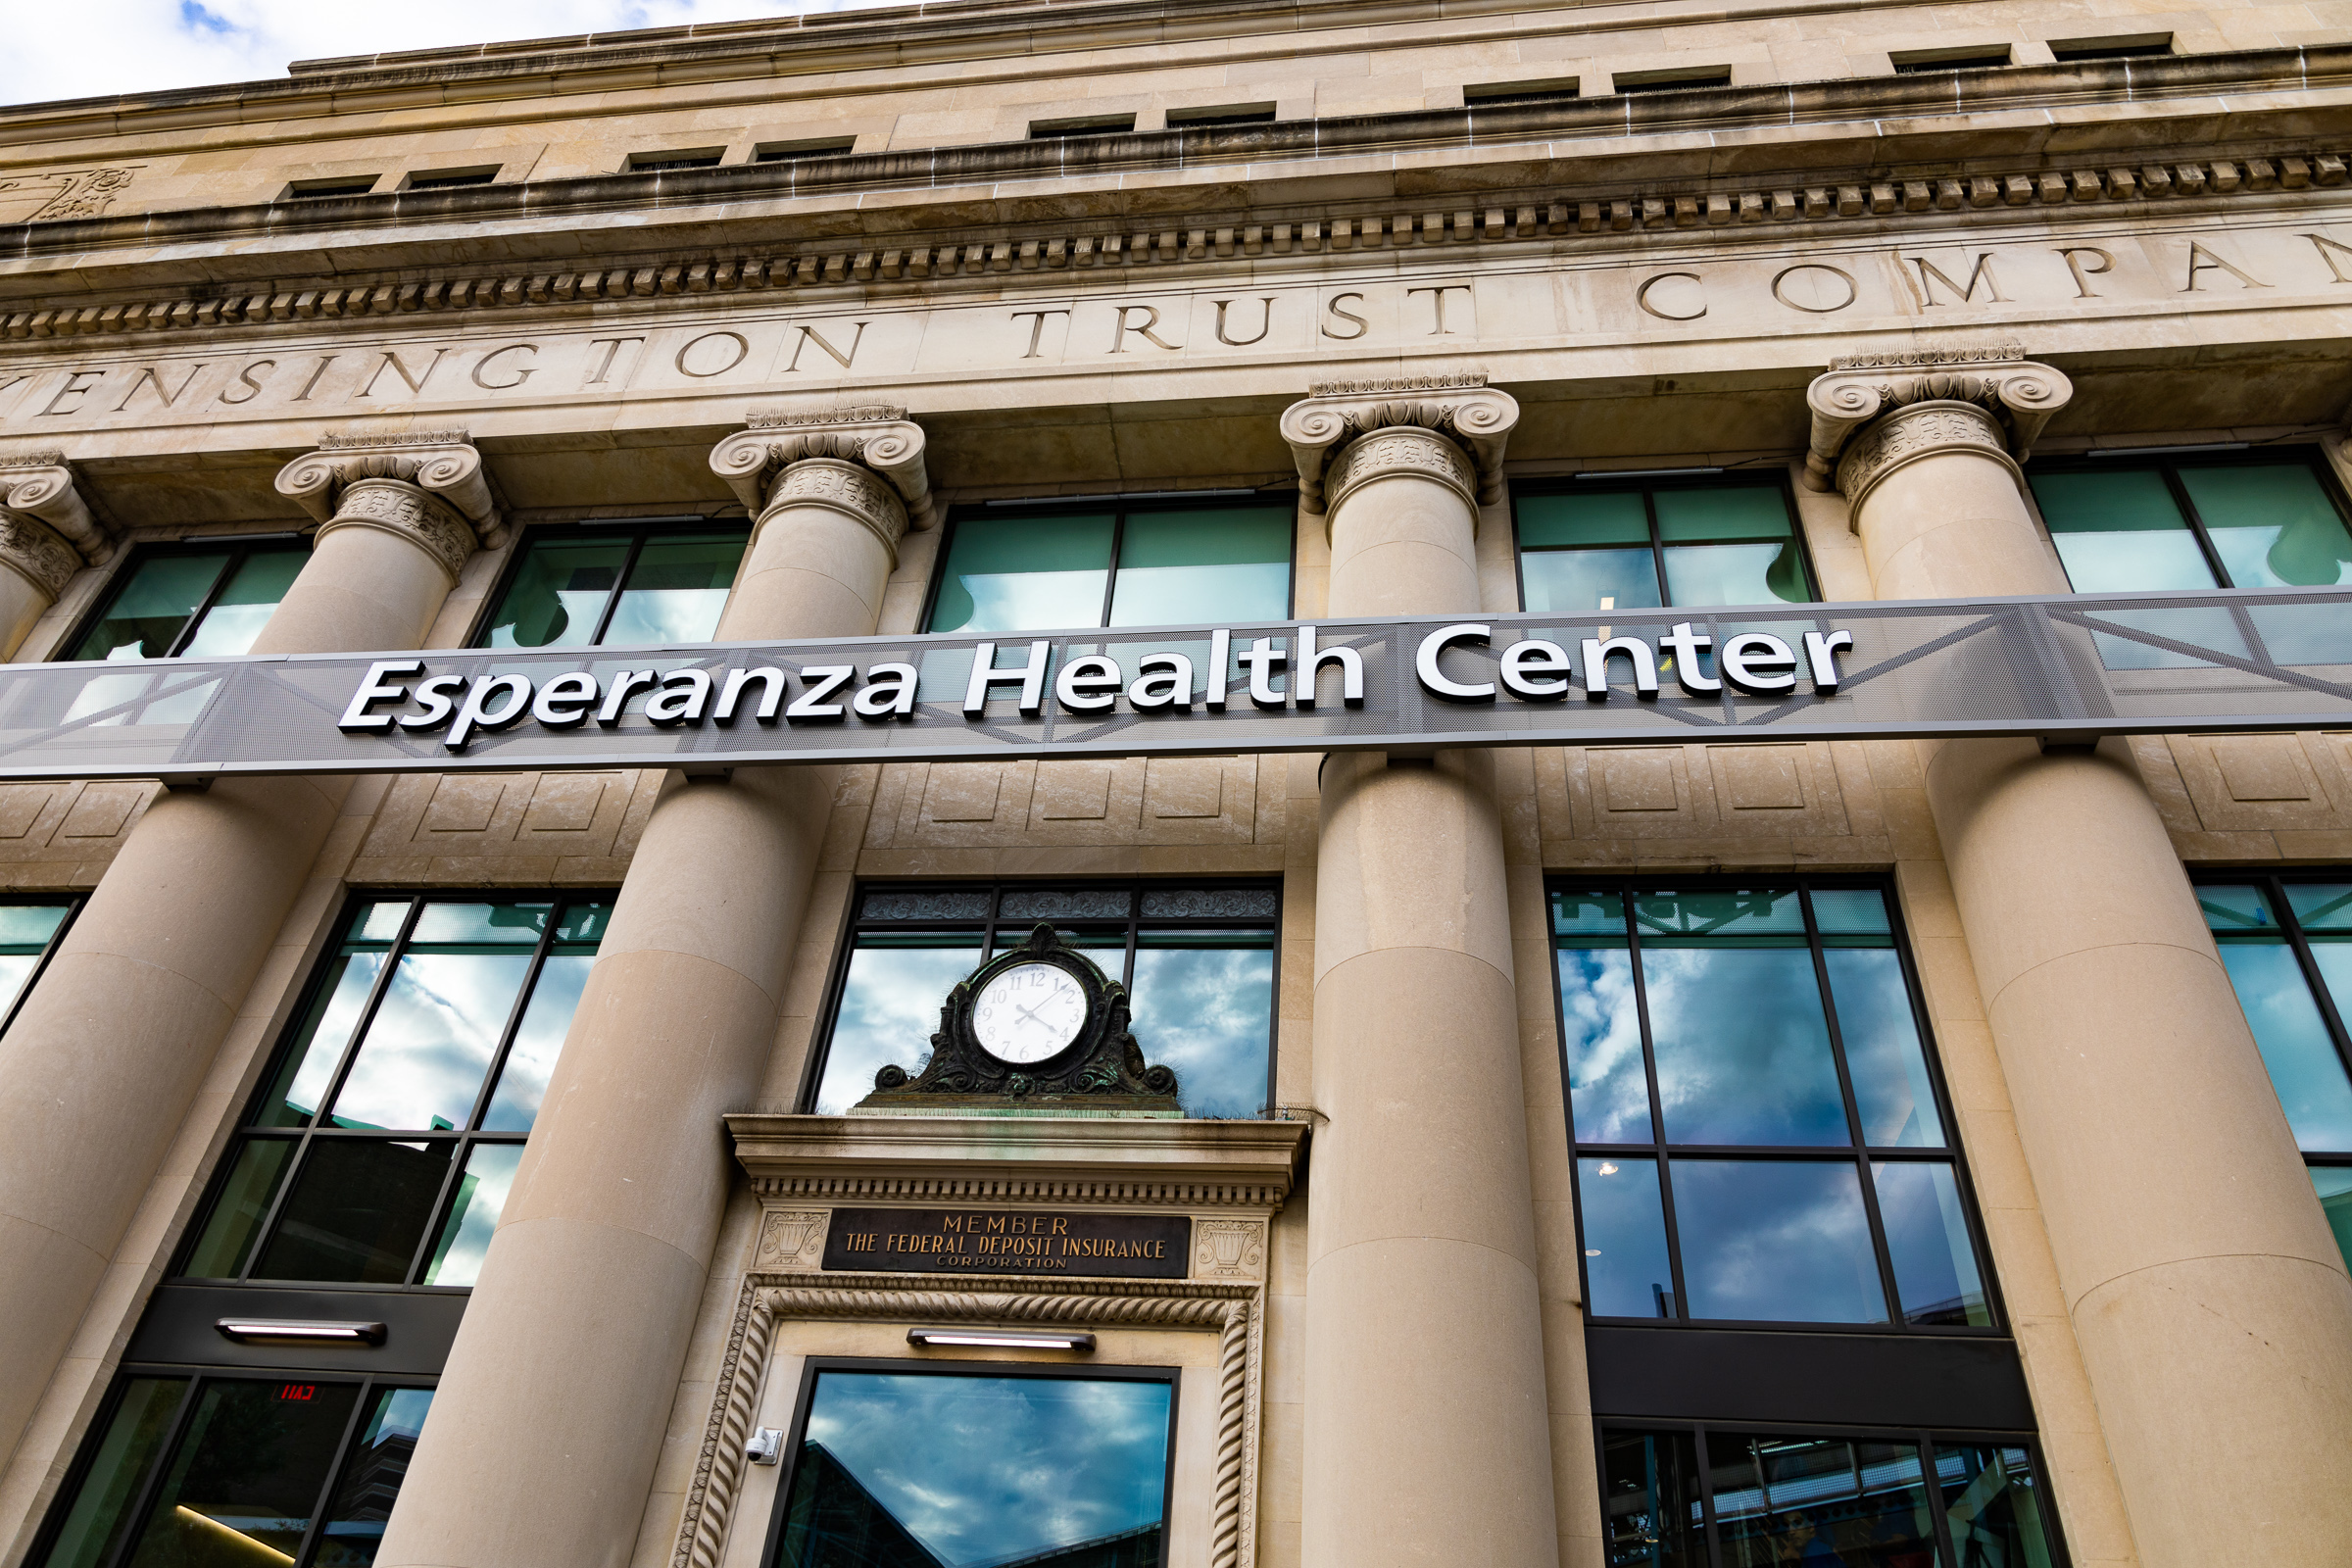 Looking up at a building with tan columns. There is an ornate clock over the front door and above that a sign that says "Esperanza Health Center"